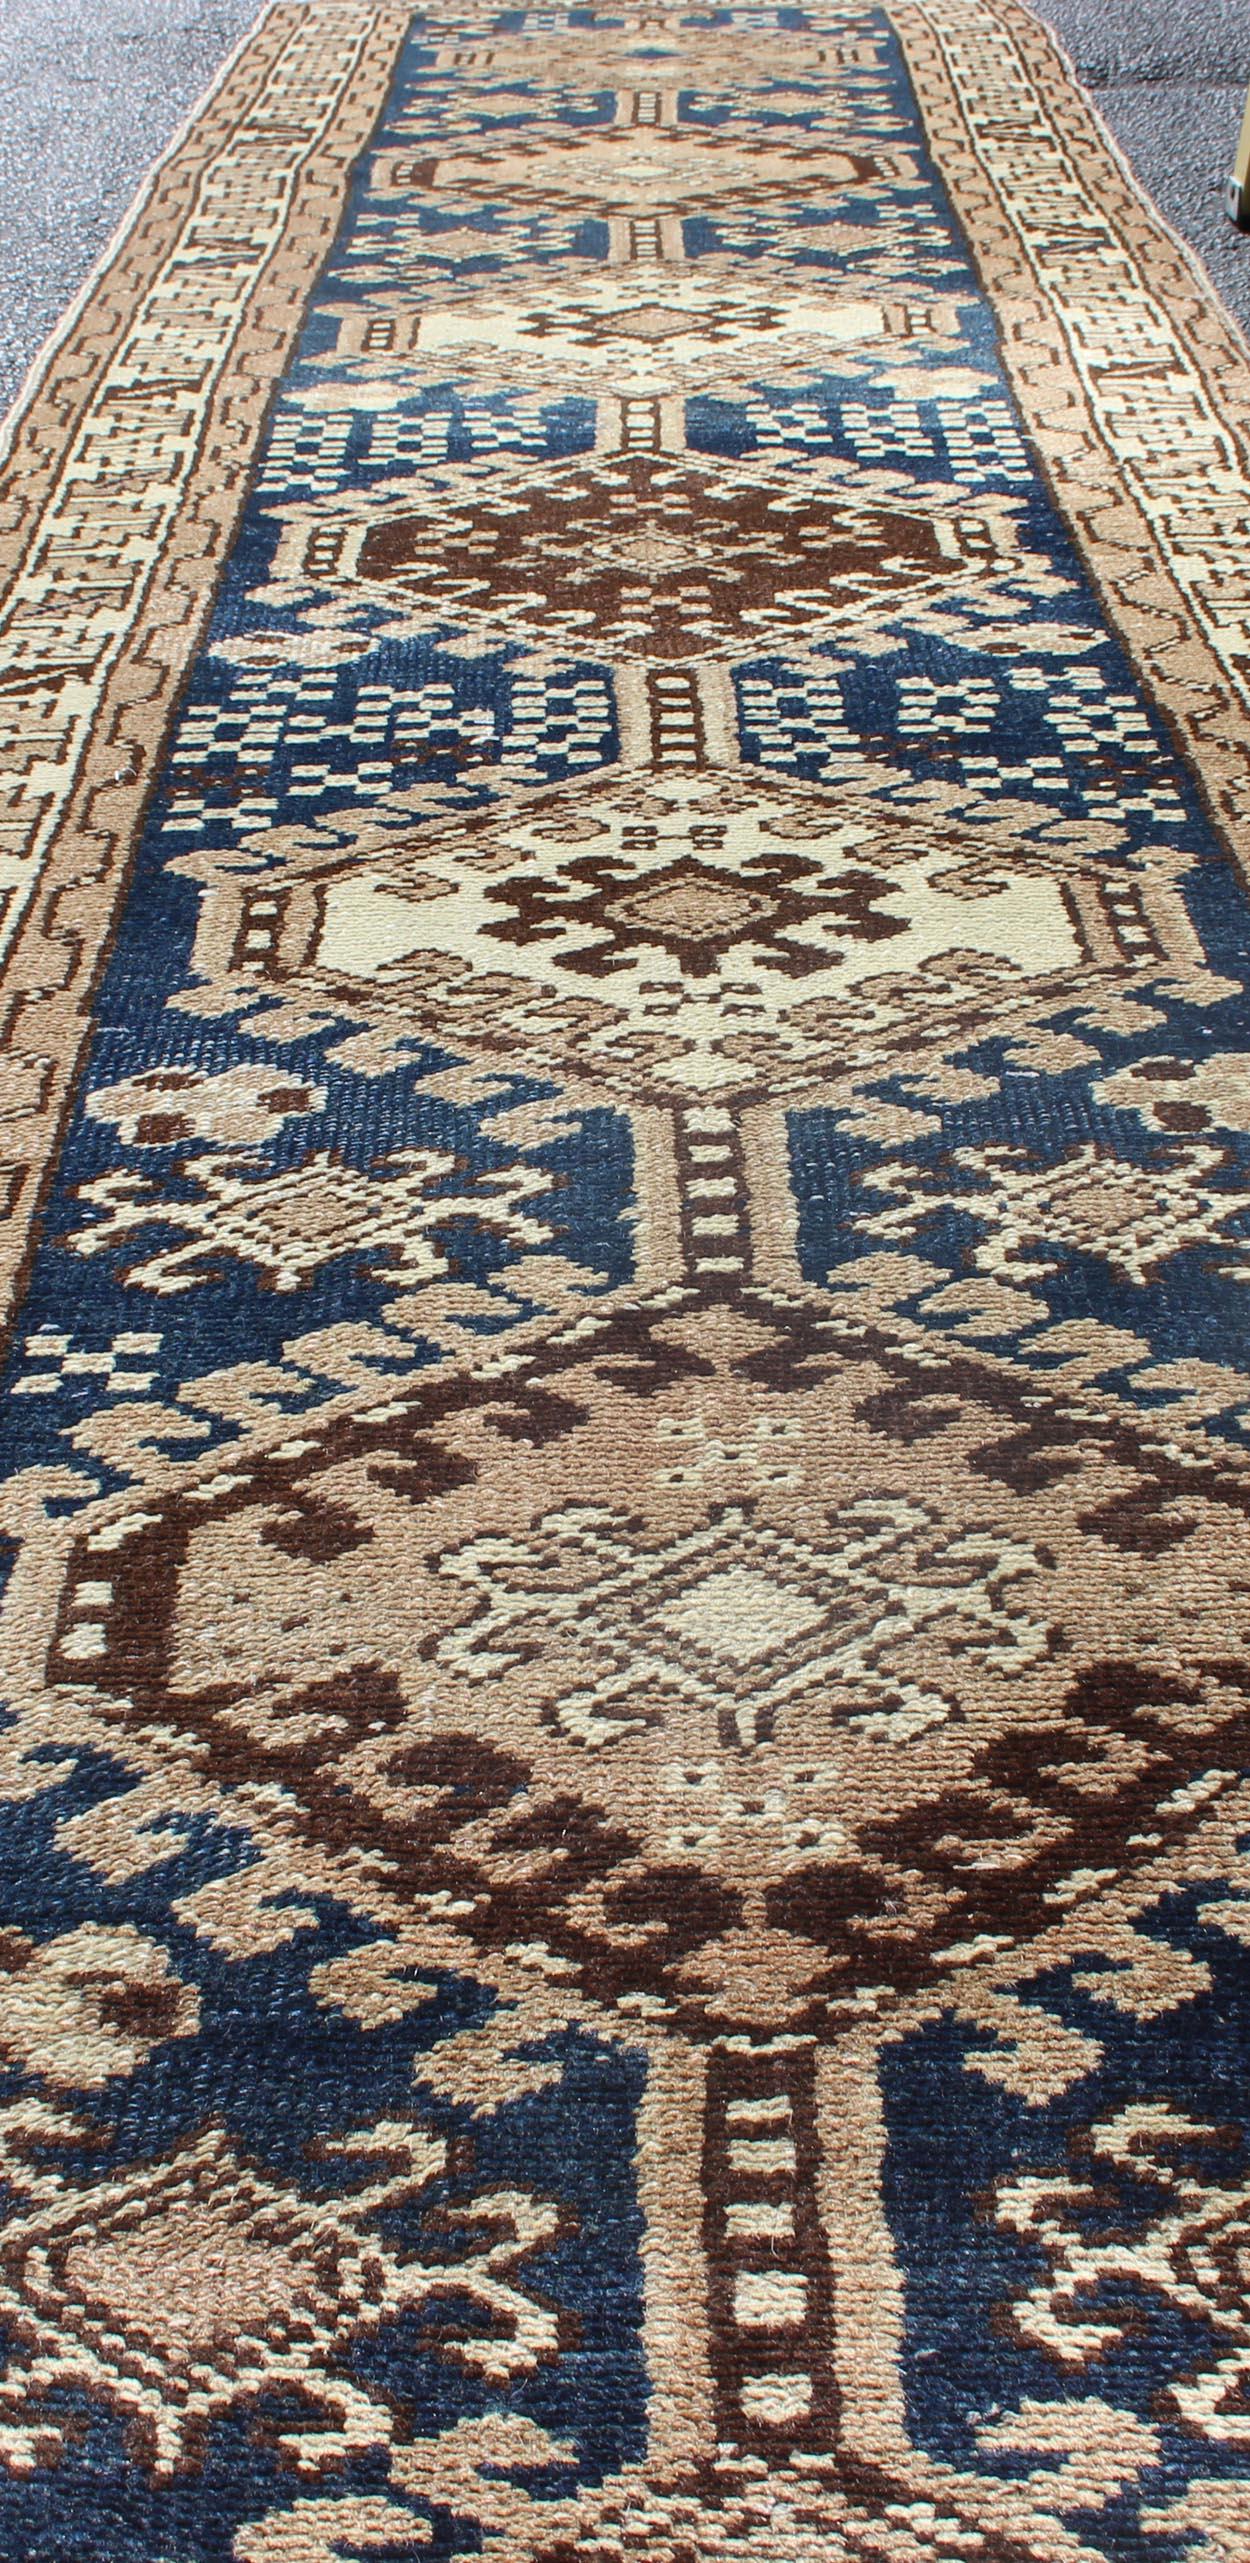 Antique Blue Tribal Karajeh Runner With Navy Blue, Brown and Earth Tones In Good Condition For Sale In Atlanta, GA